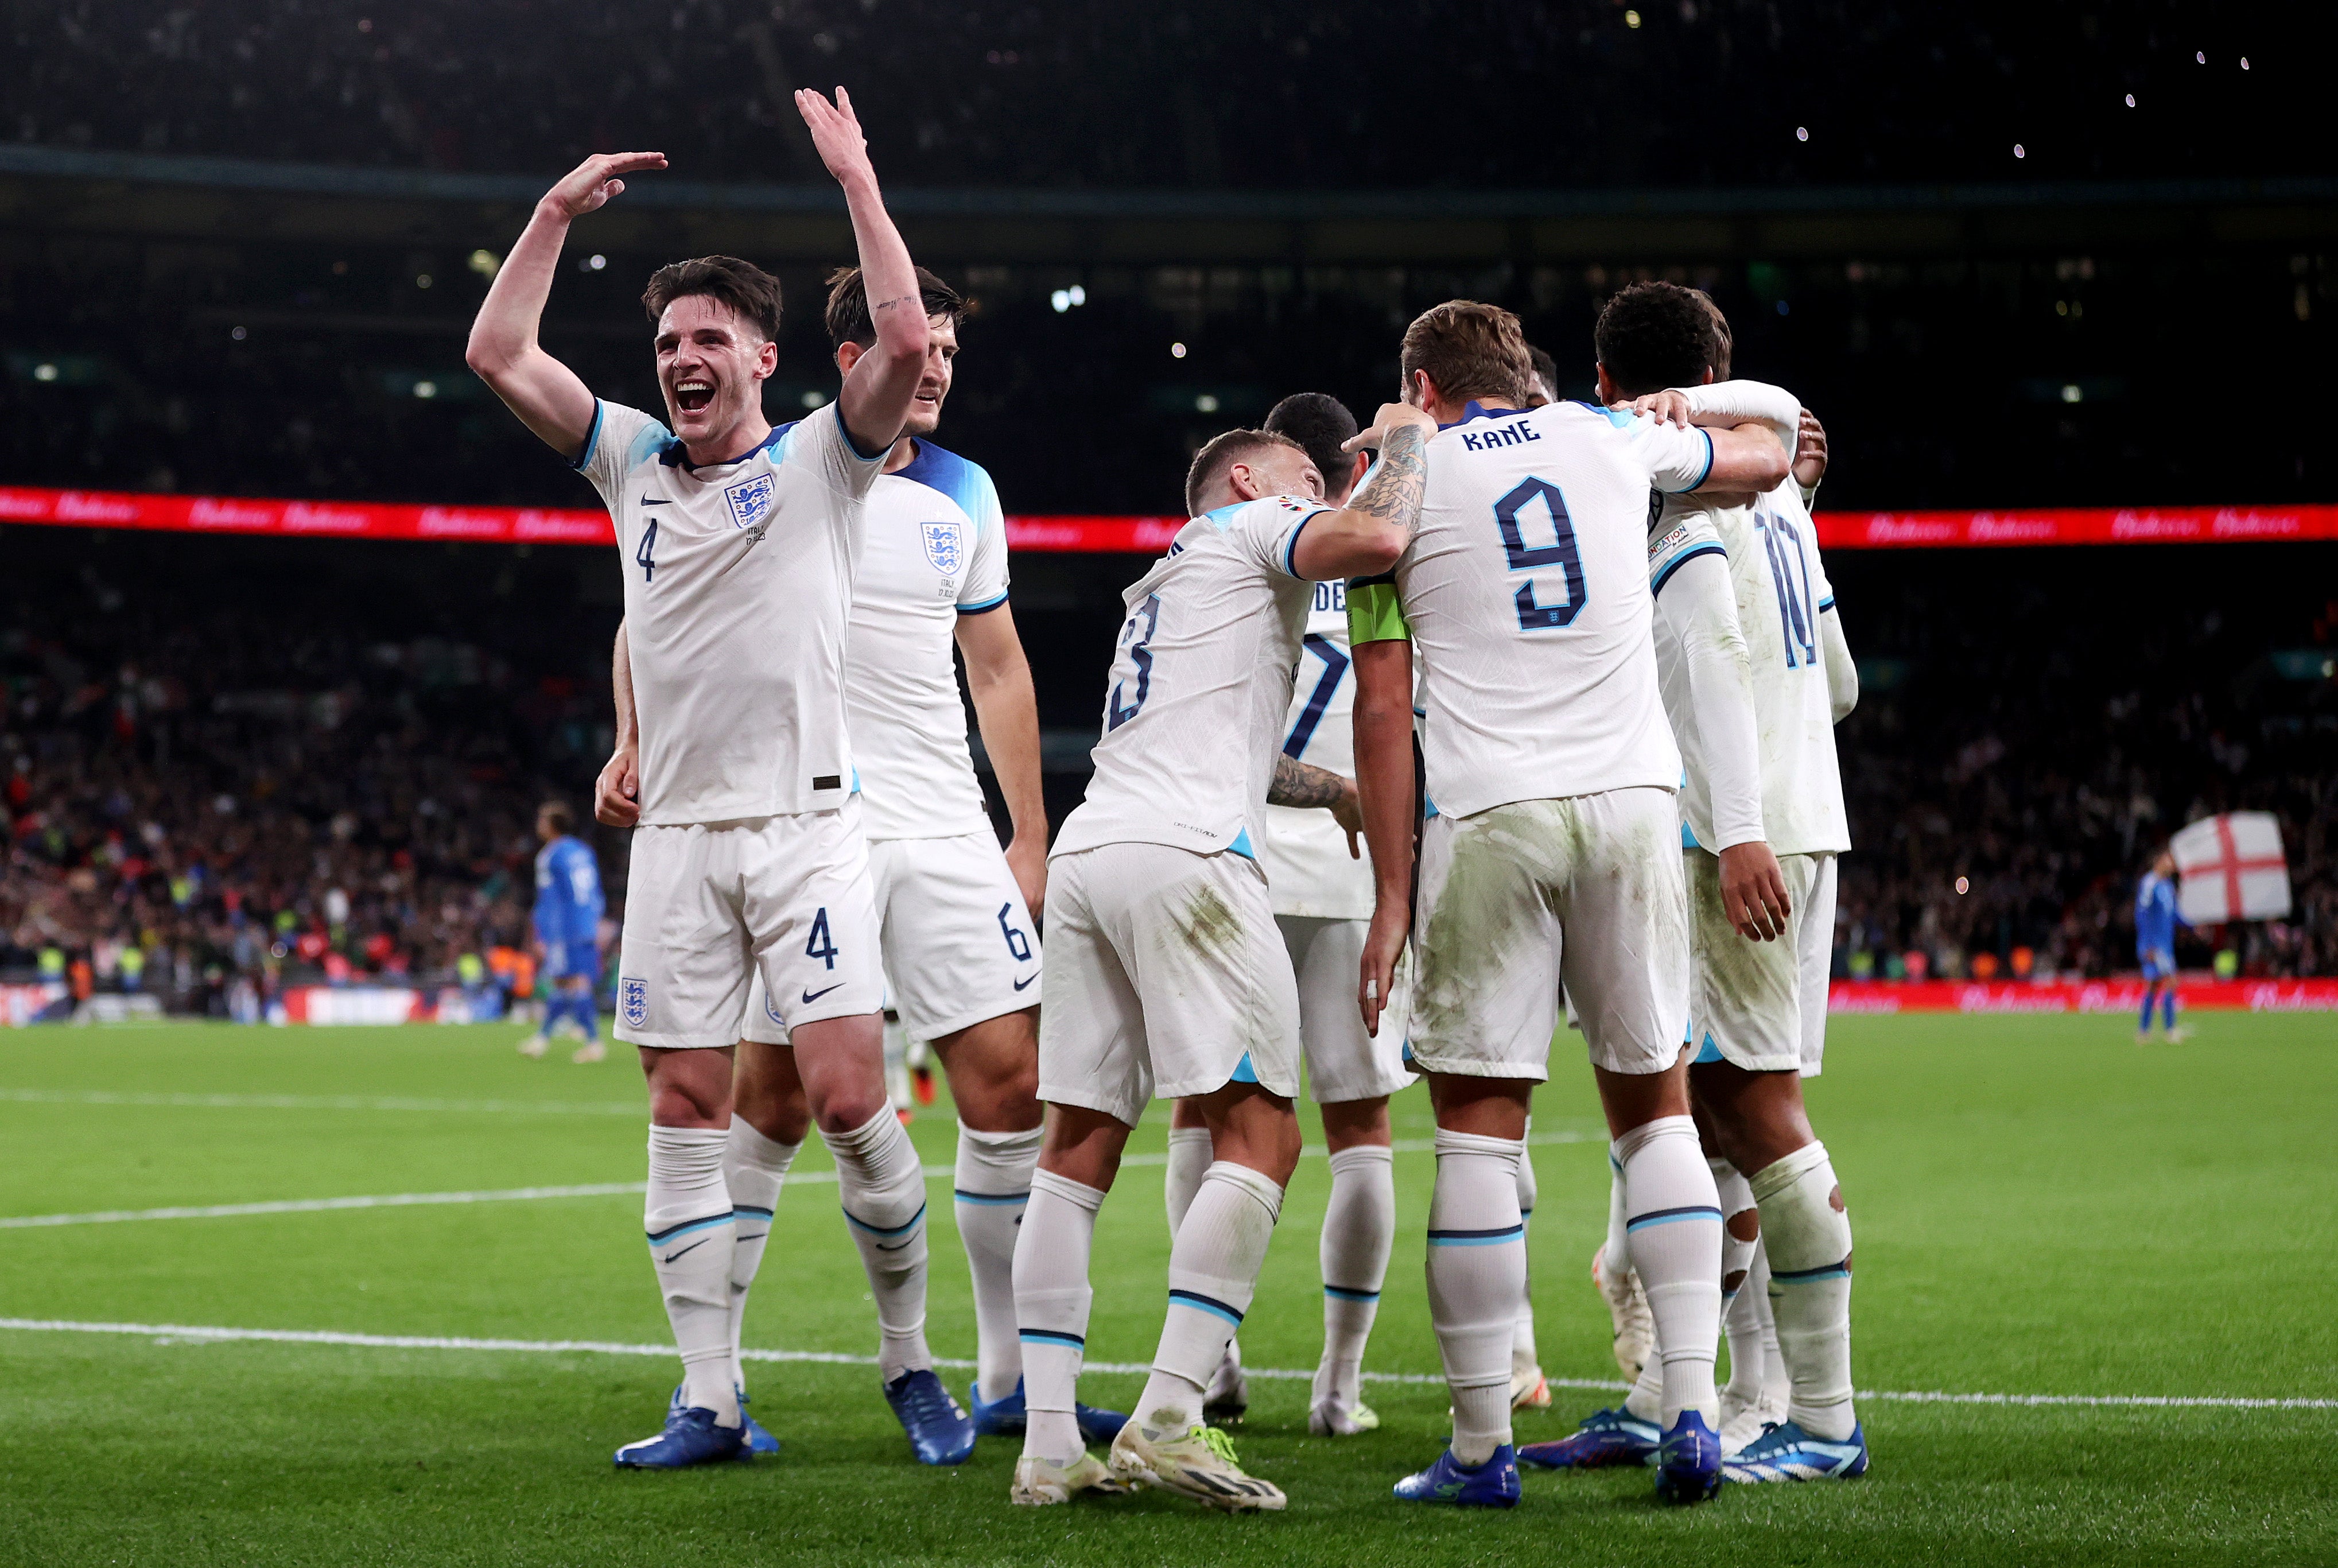 England have a new golden generation on their hands